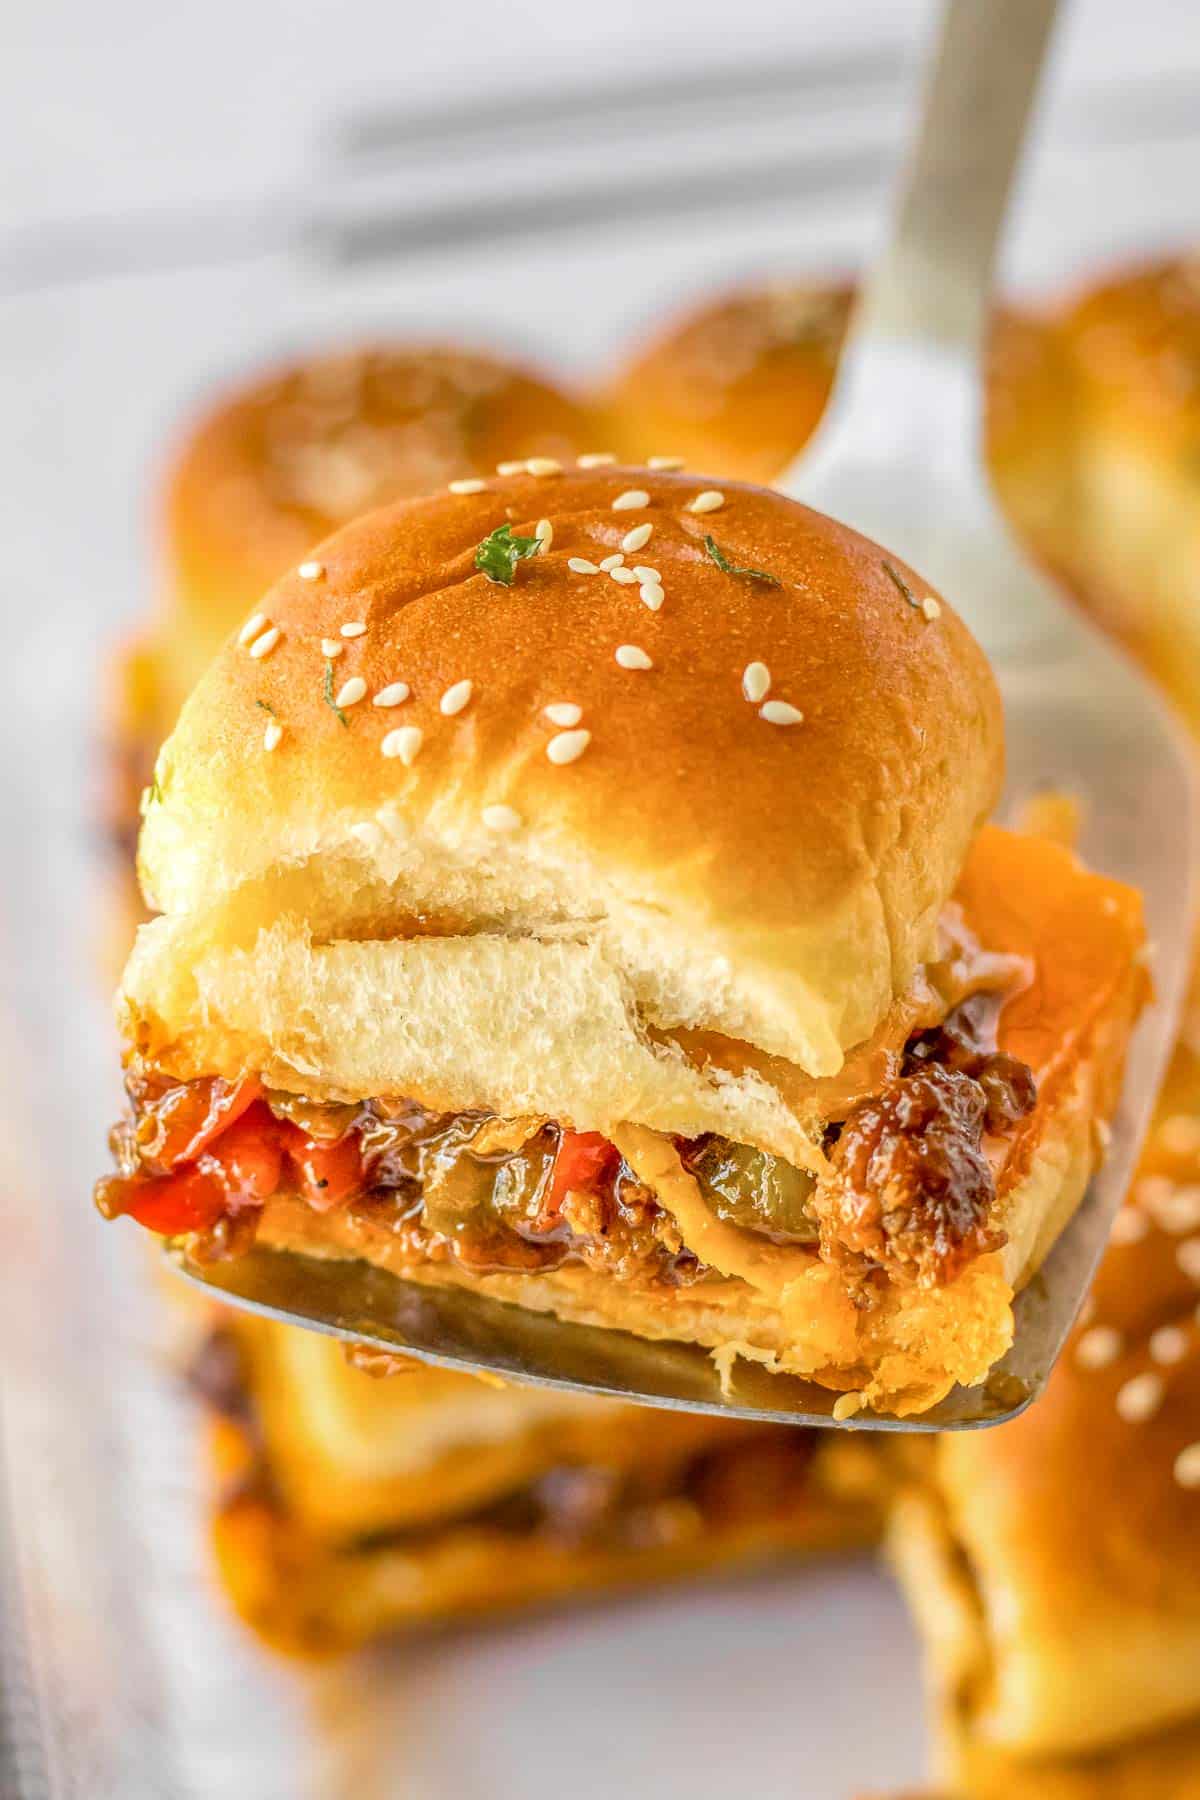 A spatula being used to pick up a Sloppy Joe Slider off of white plate.